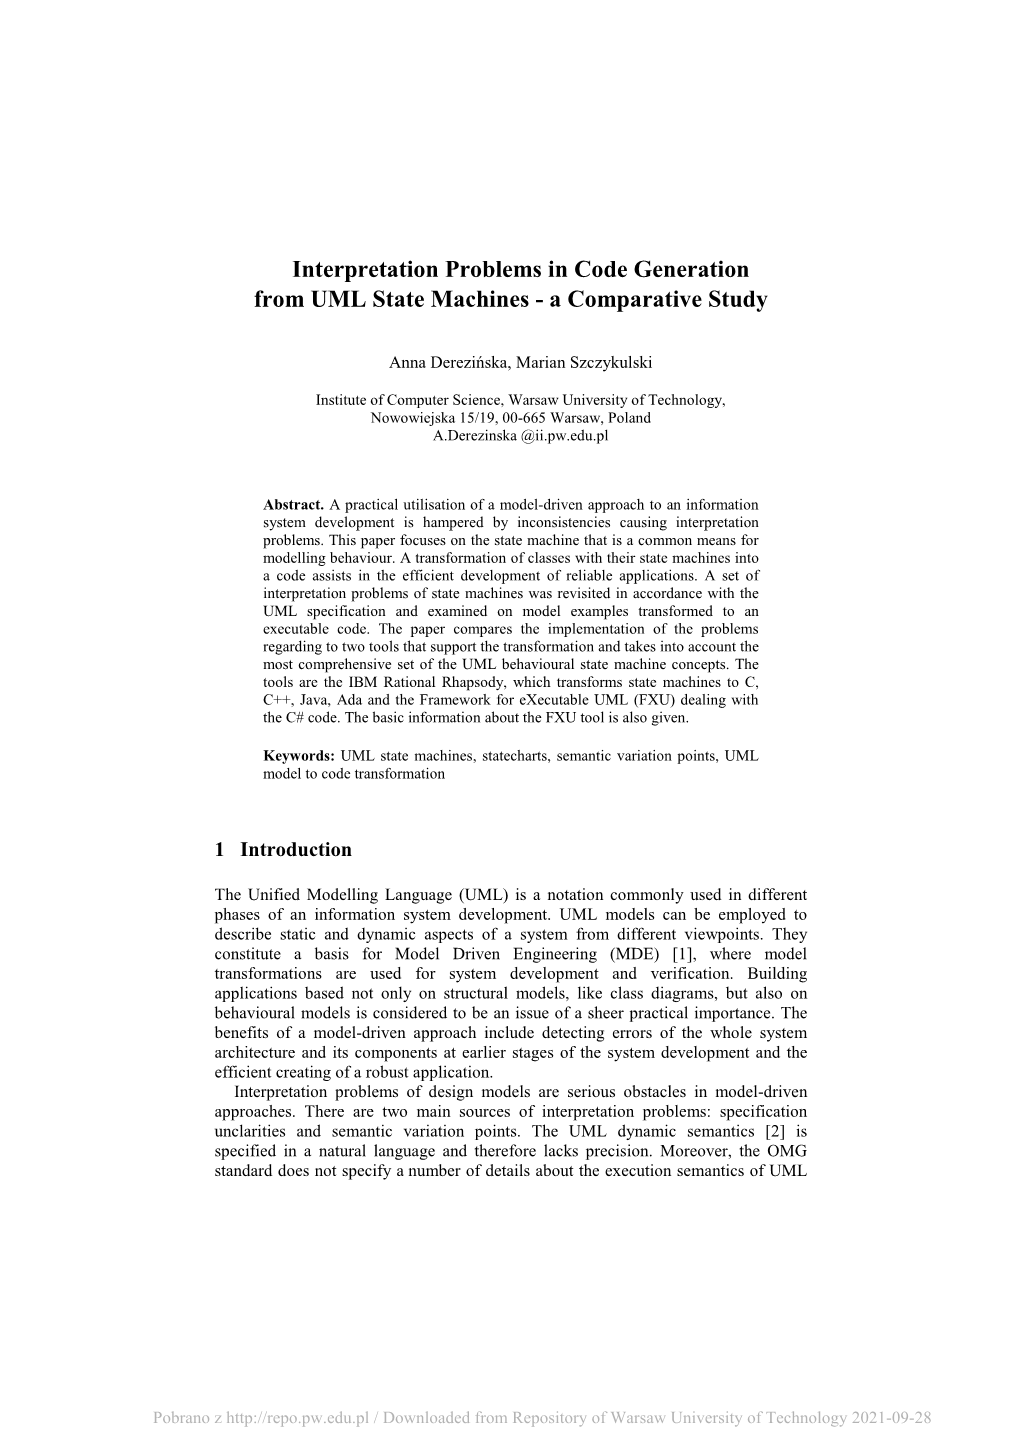 Interpretation Problems in Code Generation from UML State Machines - a Comparative Study